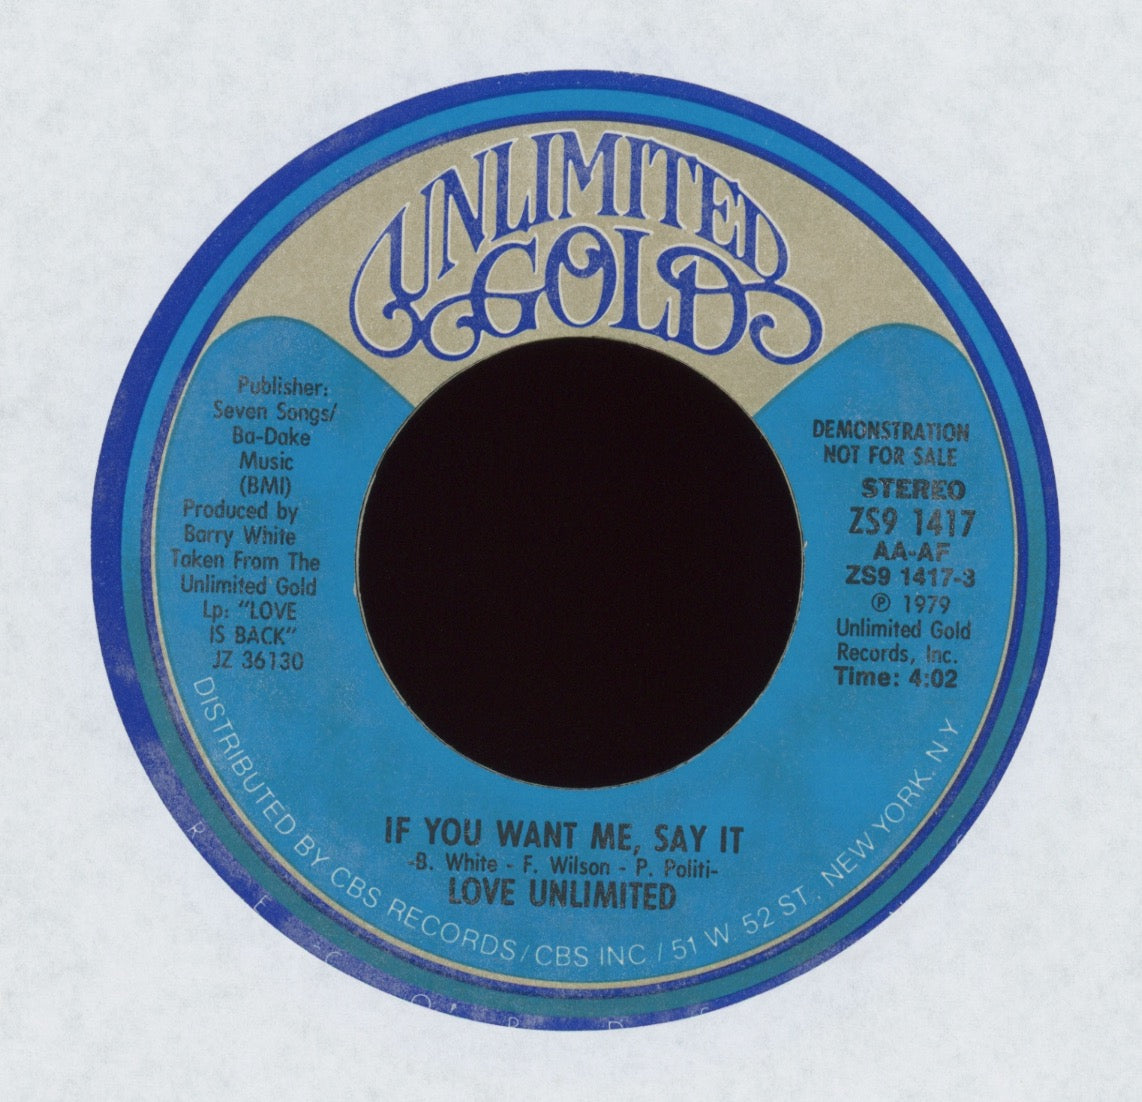 Love Unlimited - If You Want Me, Say It on Unlimited Gold Promo